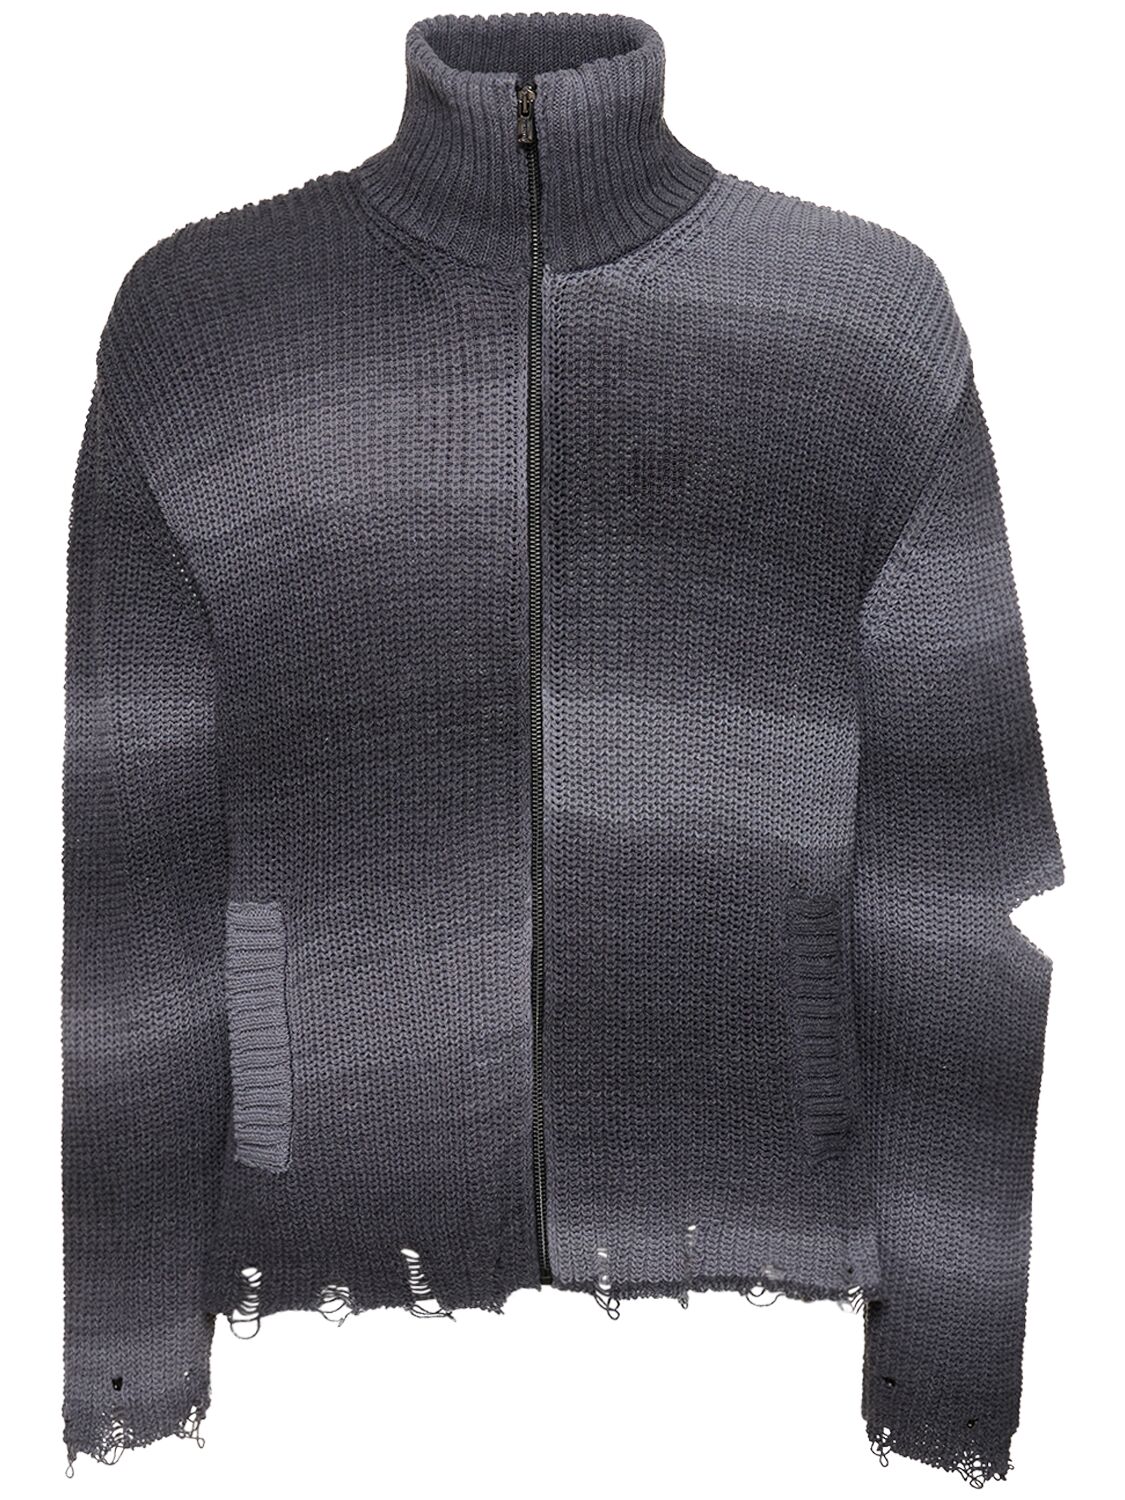 A Paper Kid Unisex Striped Knitted Jacket In Black